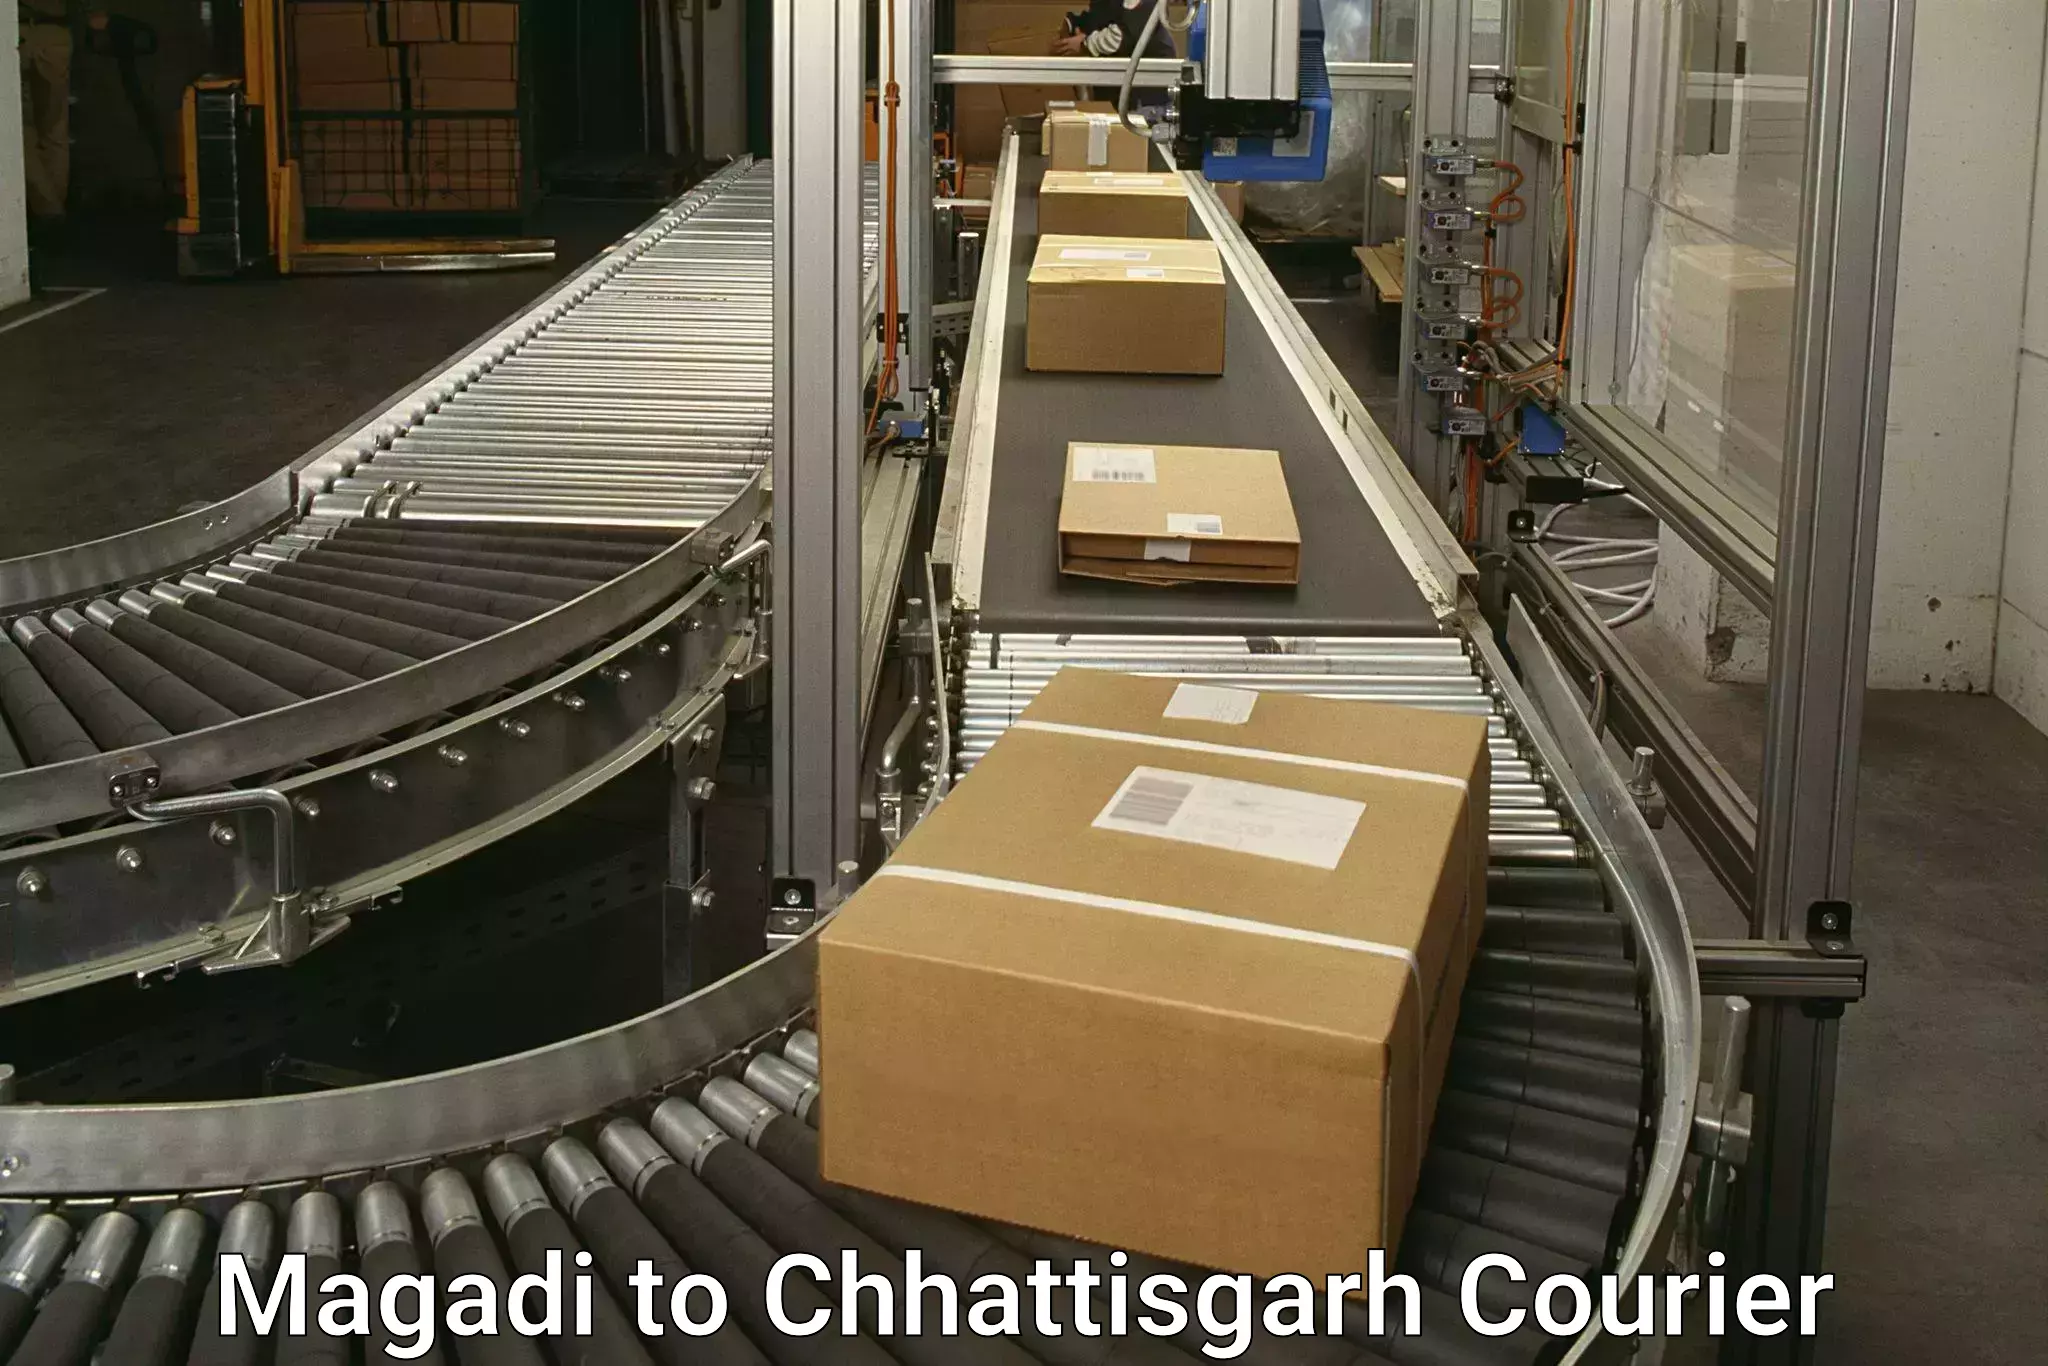 Specialized shipment handling Magadi to bagbahra